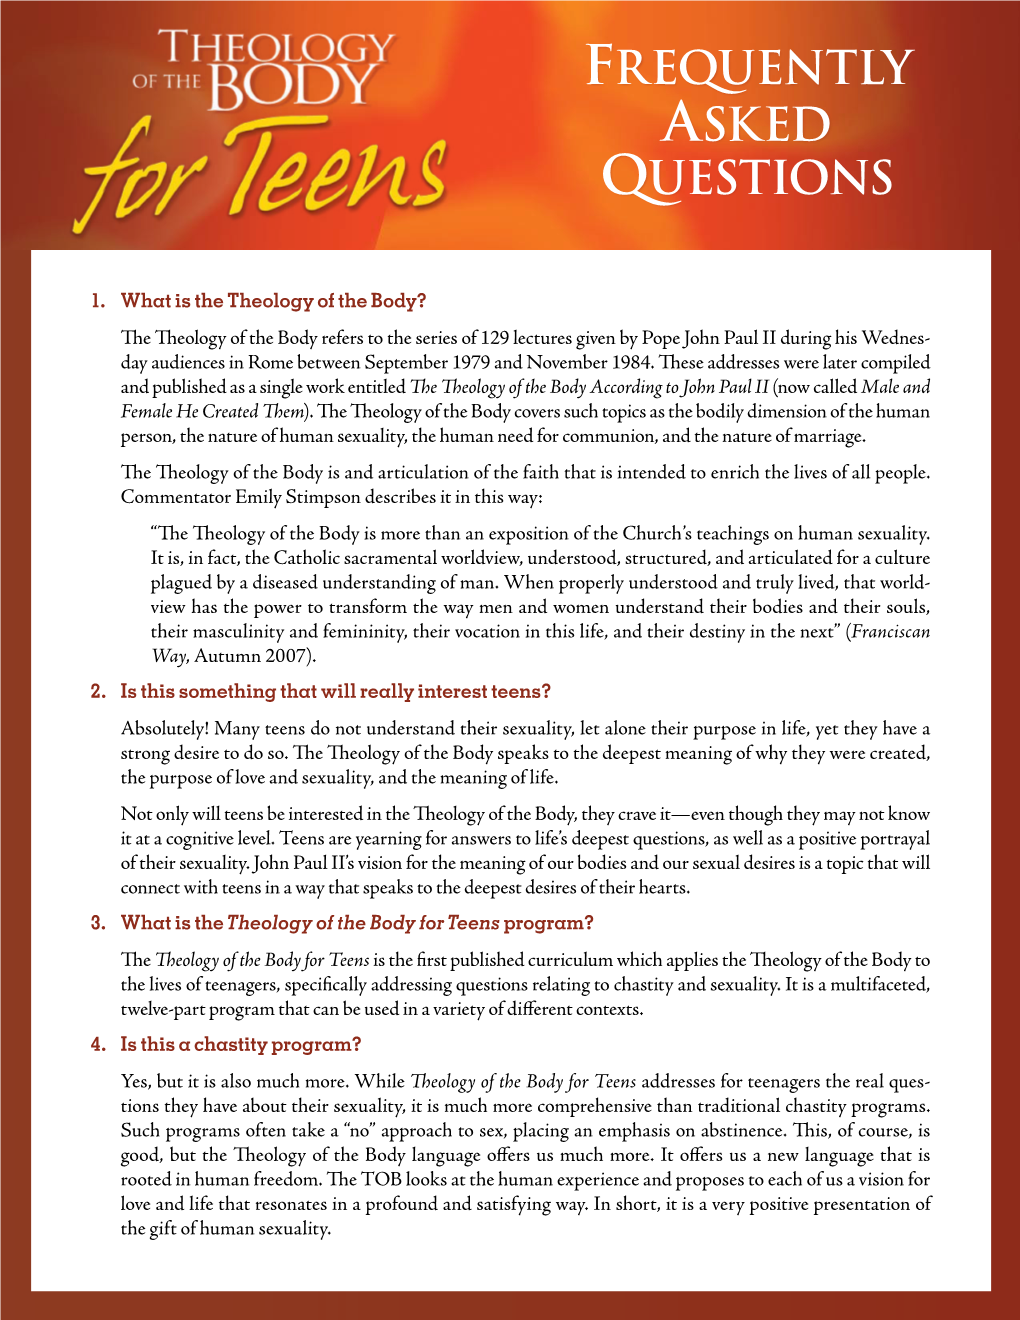 Frequently Asked Questions on Theology of the Body